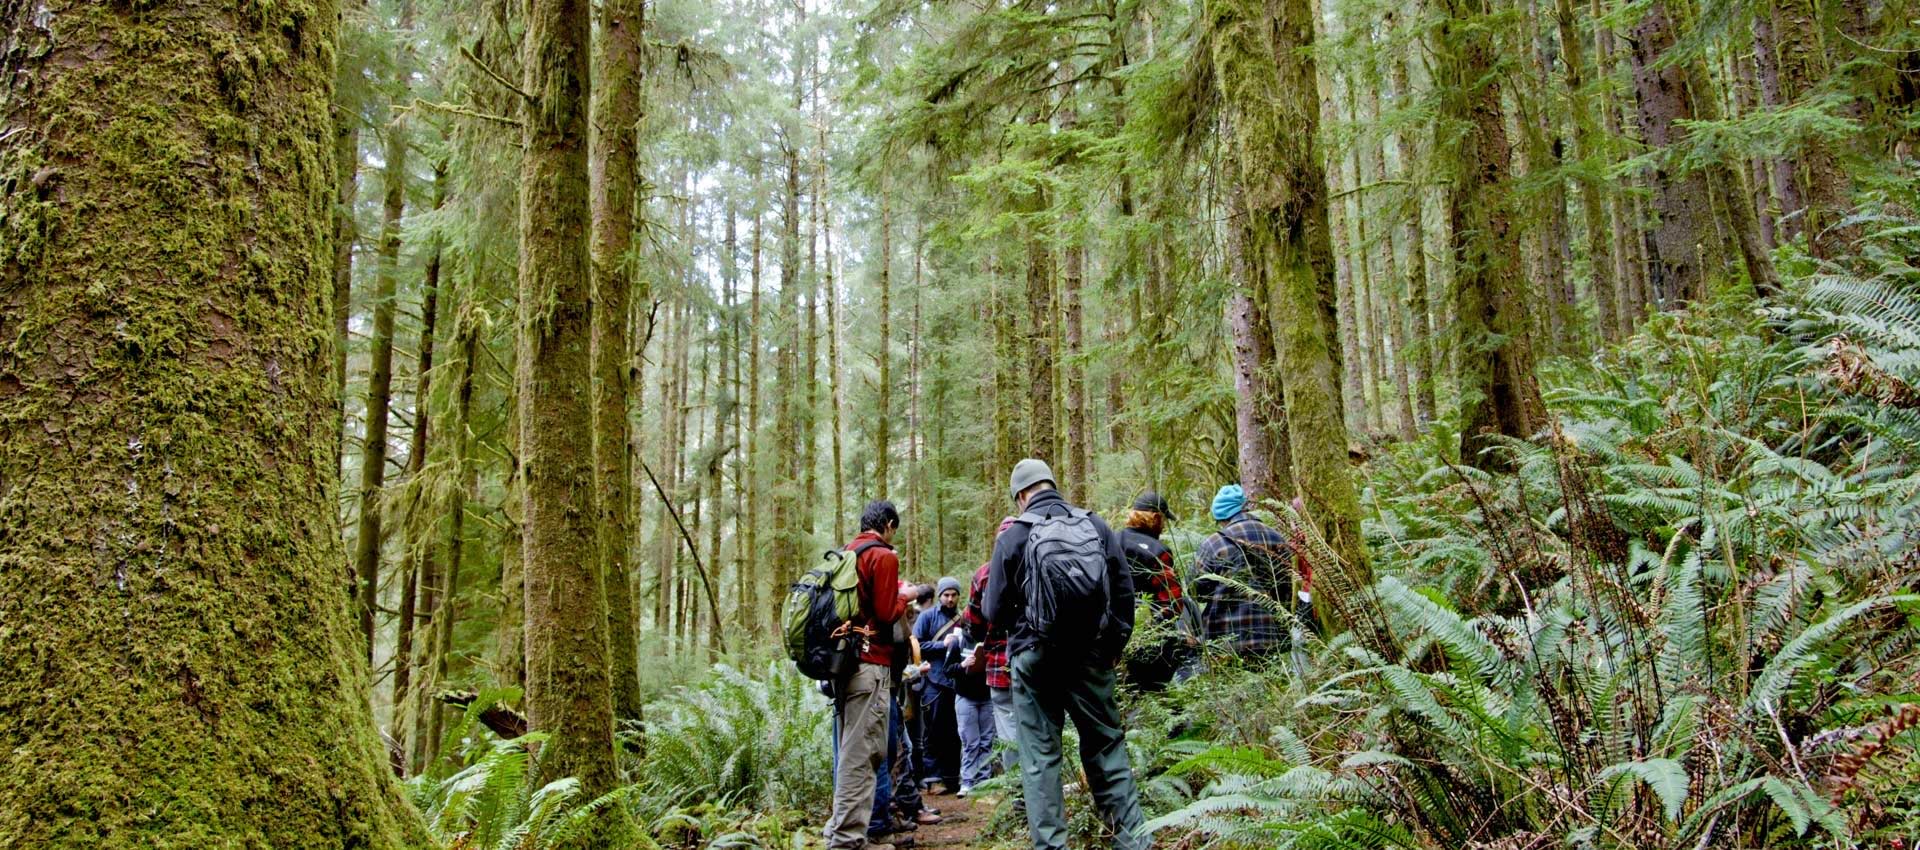 A group of people hiking in the redwoods